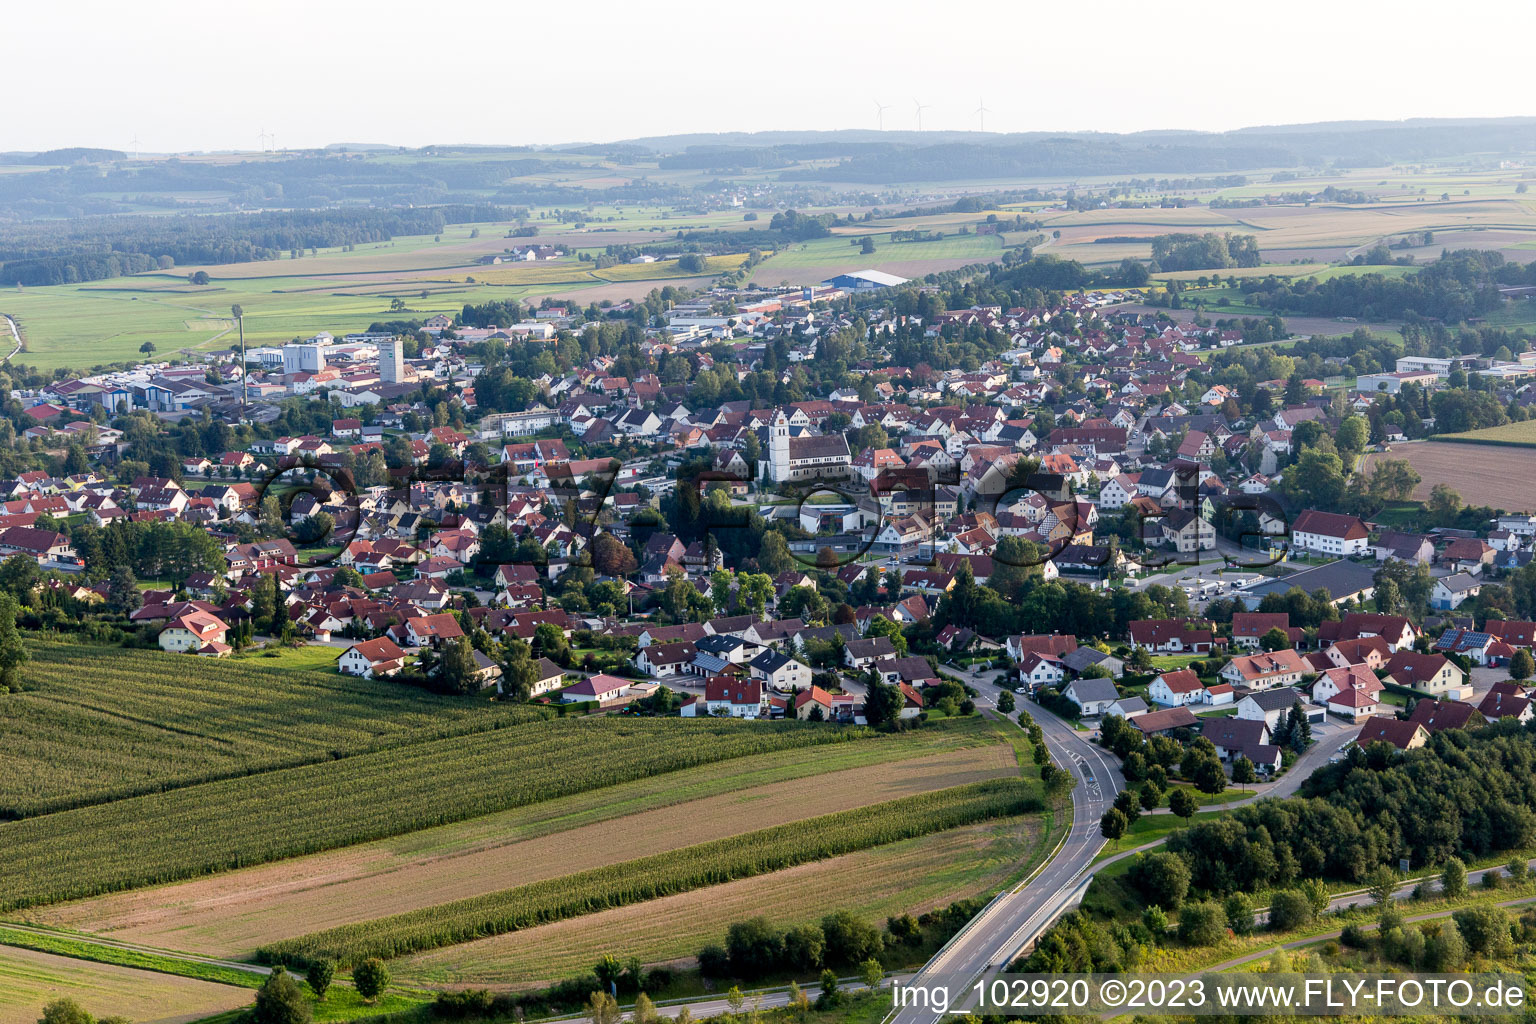 Ostrach in the state Baden-Wuerttemberg, Germany